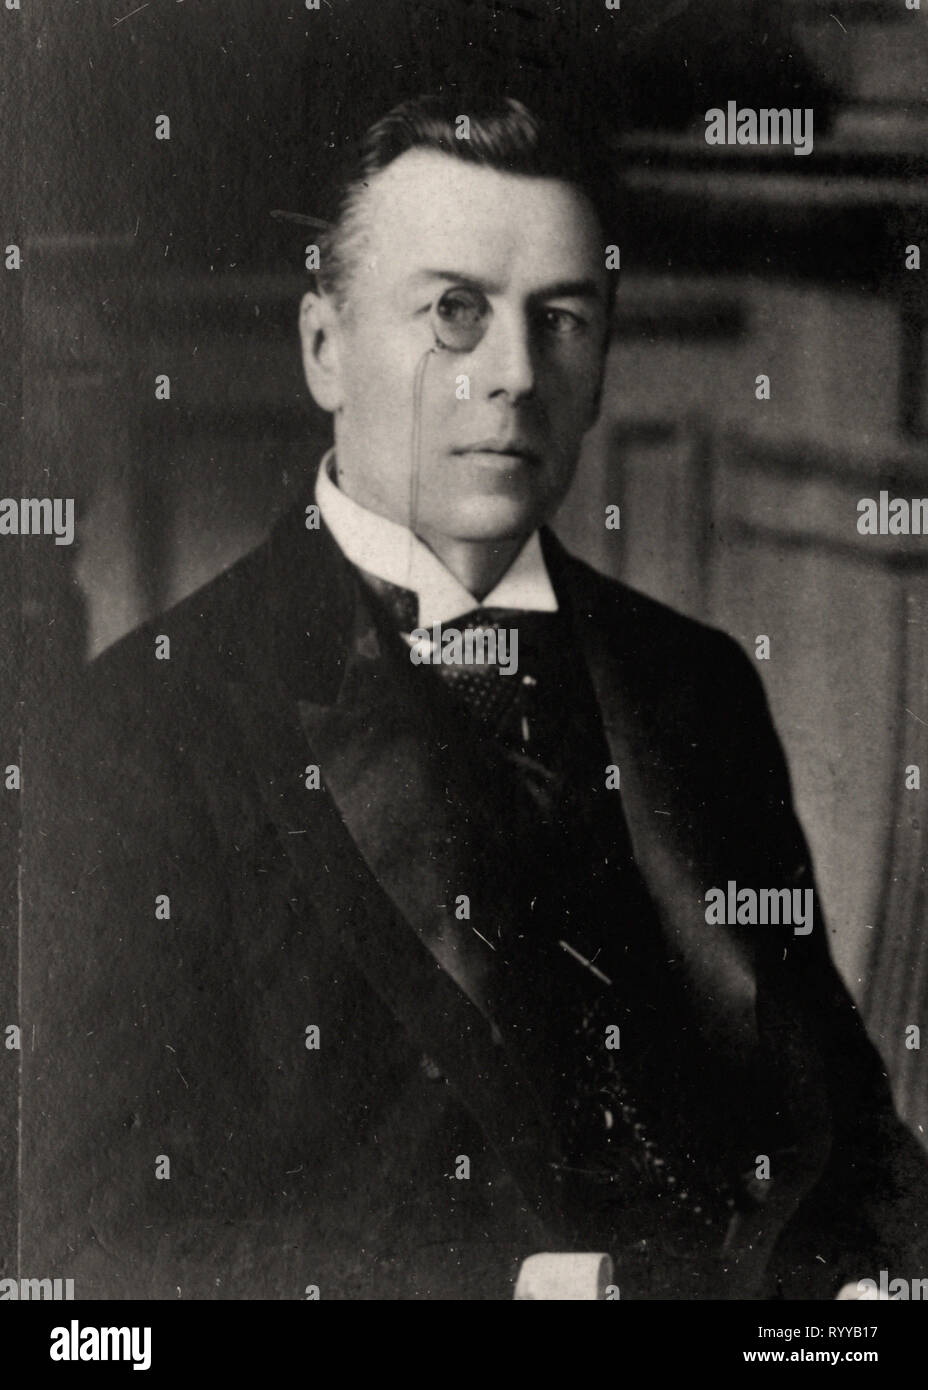 Photographic Portrait Of Chamberlain   From Collection Félix Potin, Early 20th Century Stock Photo